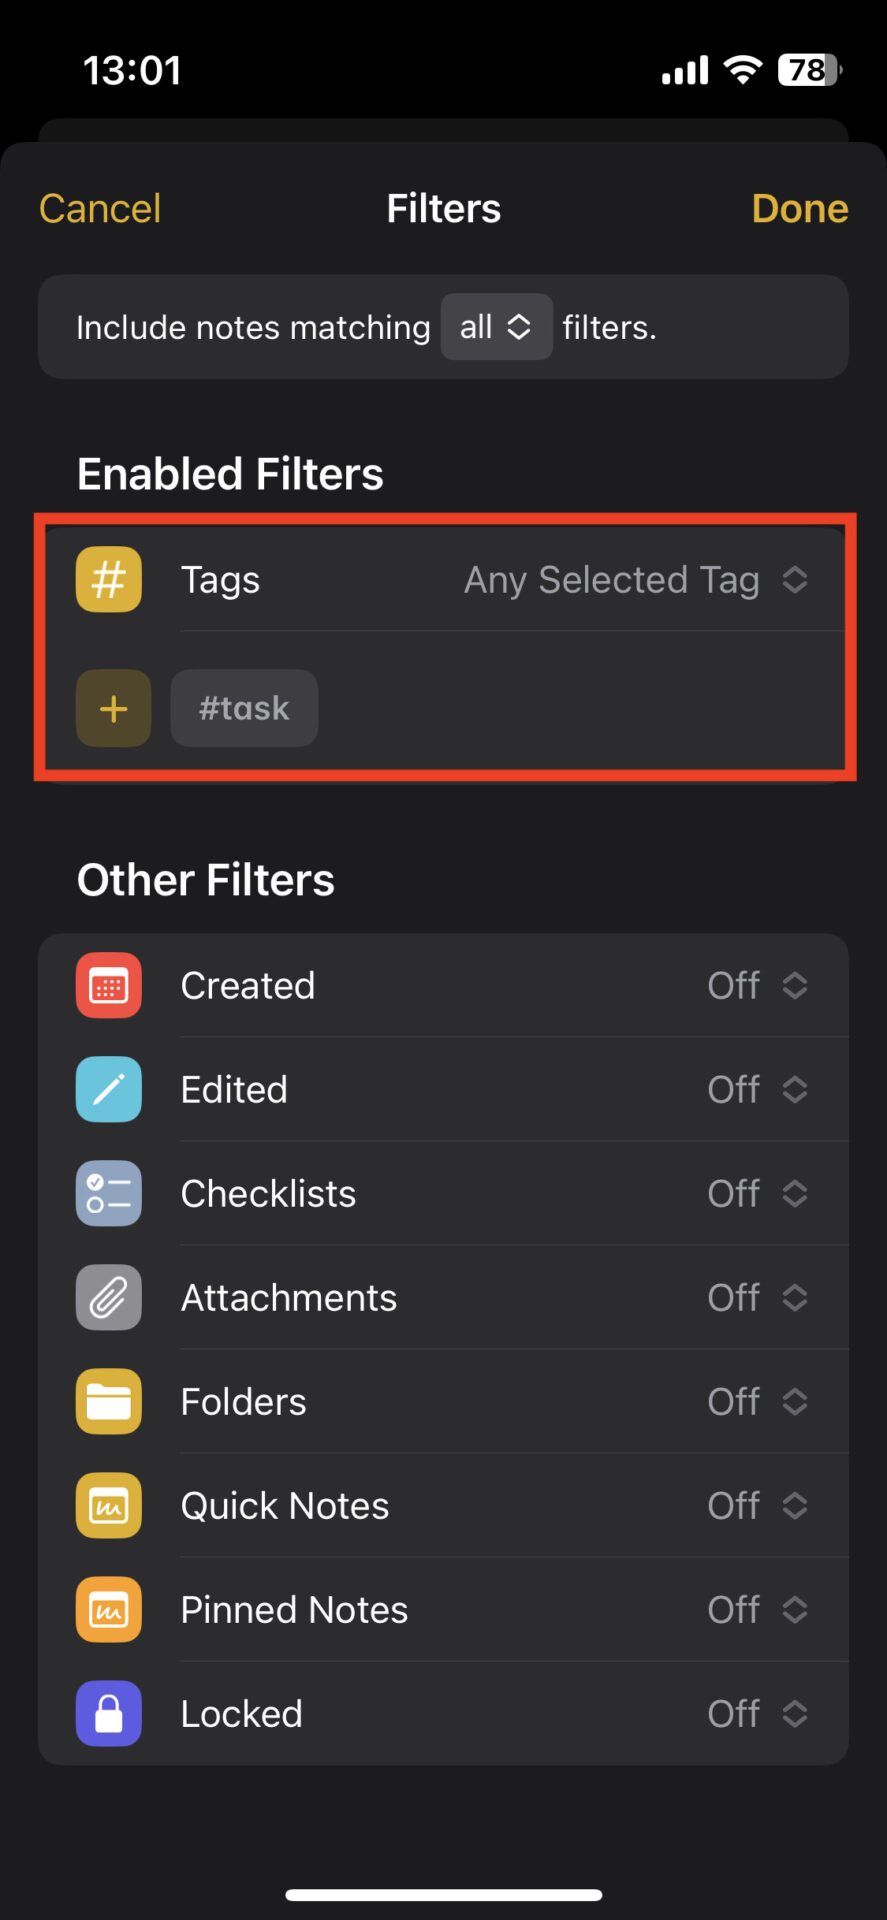 Choosing tag that you want to include the folder